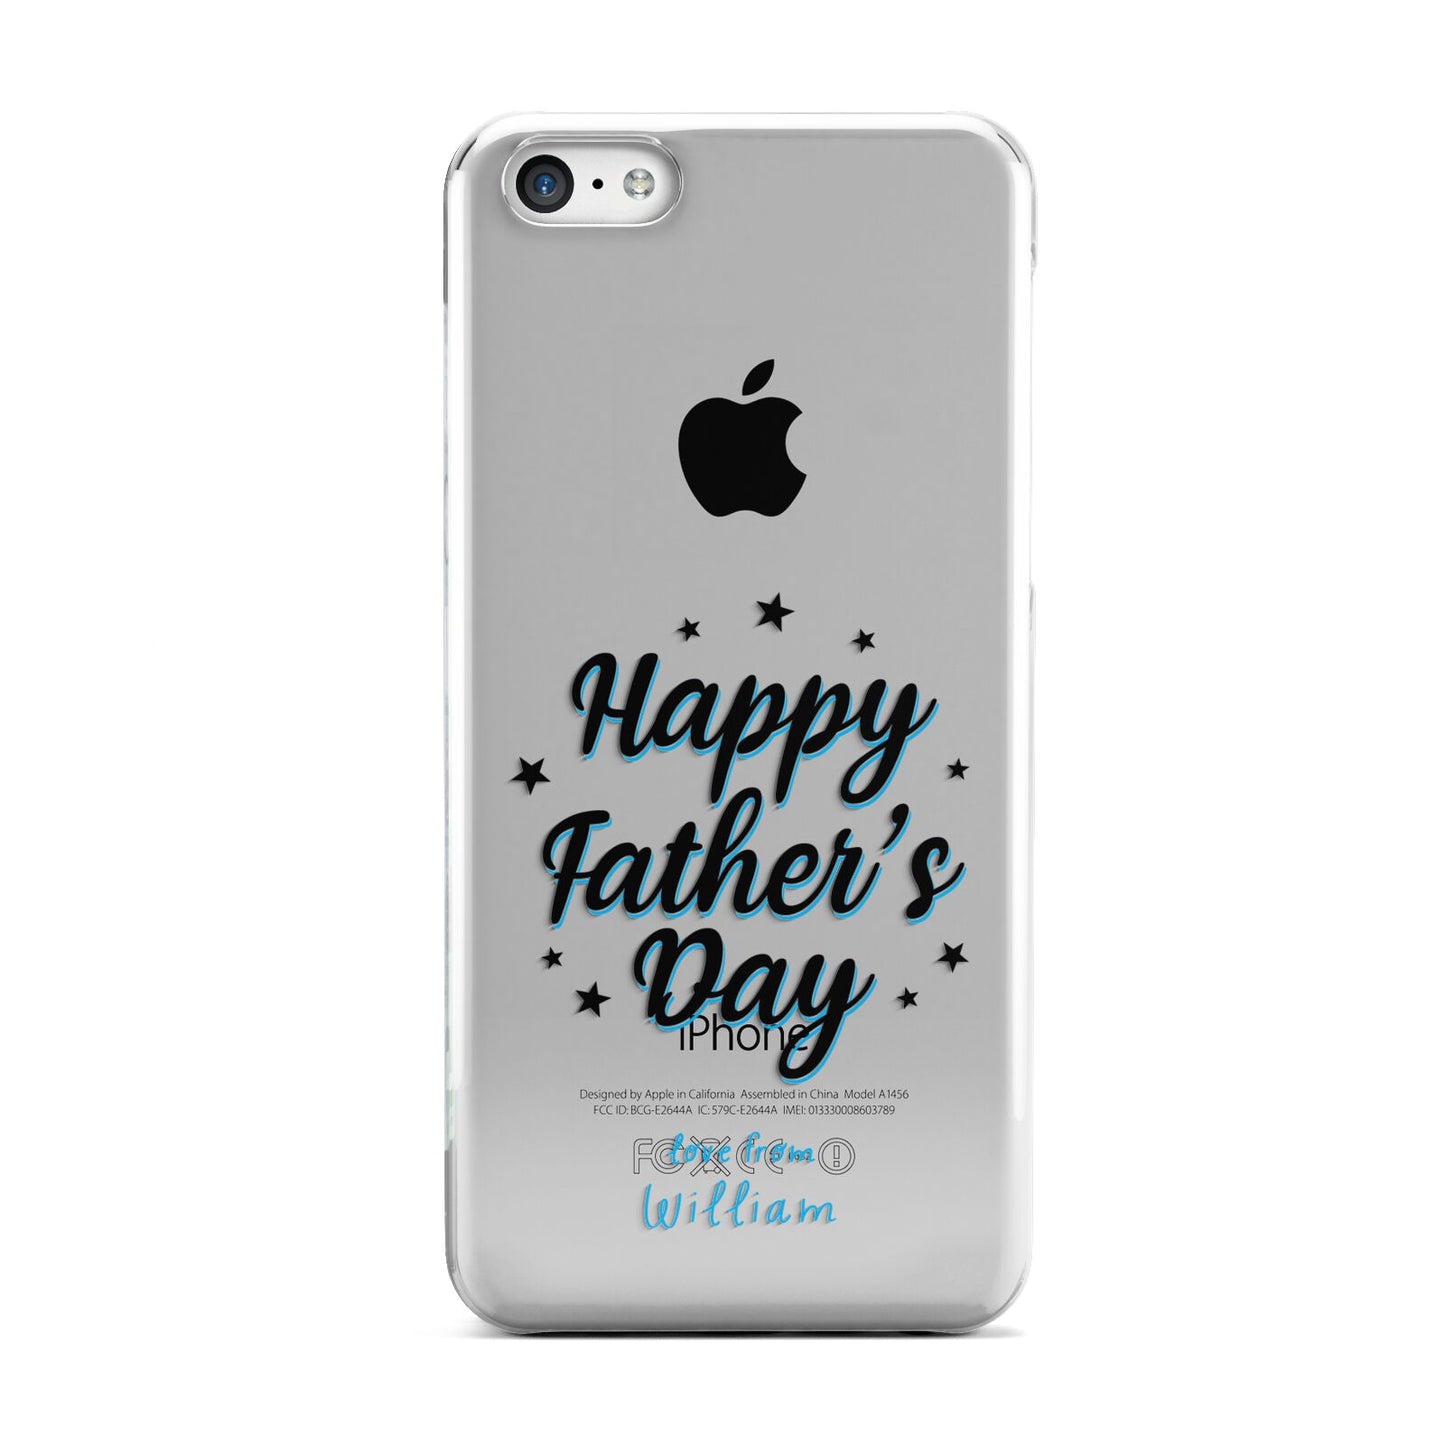 Fathers Day Apple iPhone 5c Case